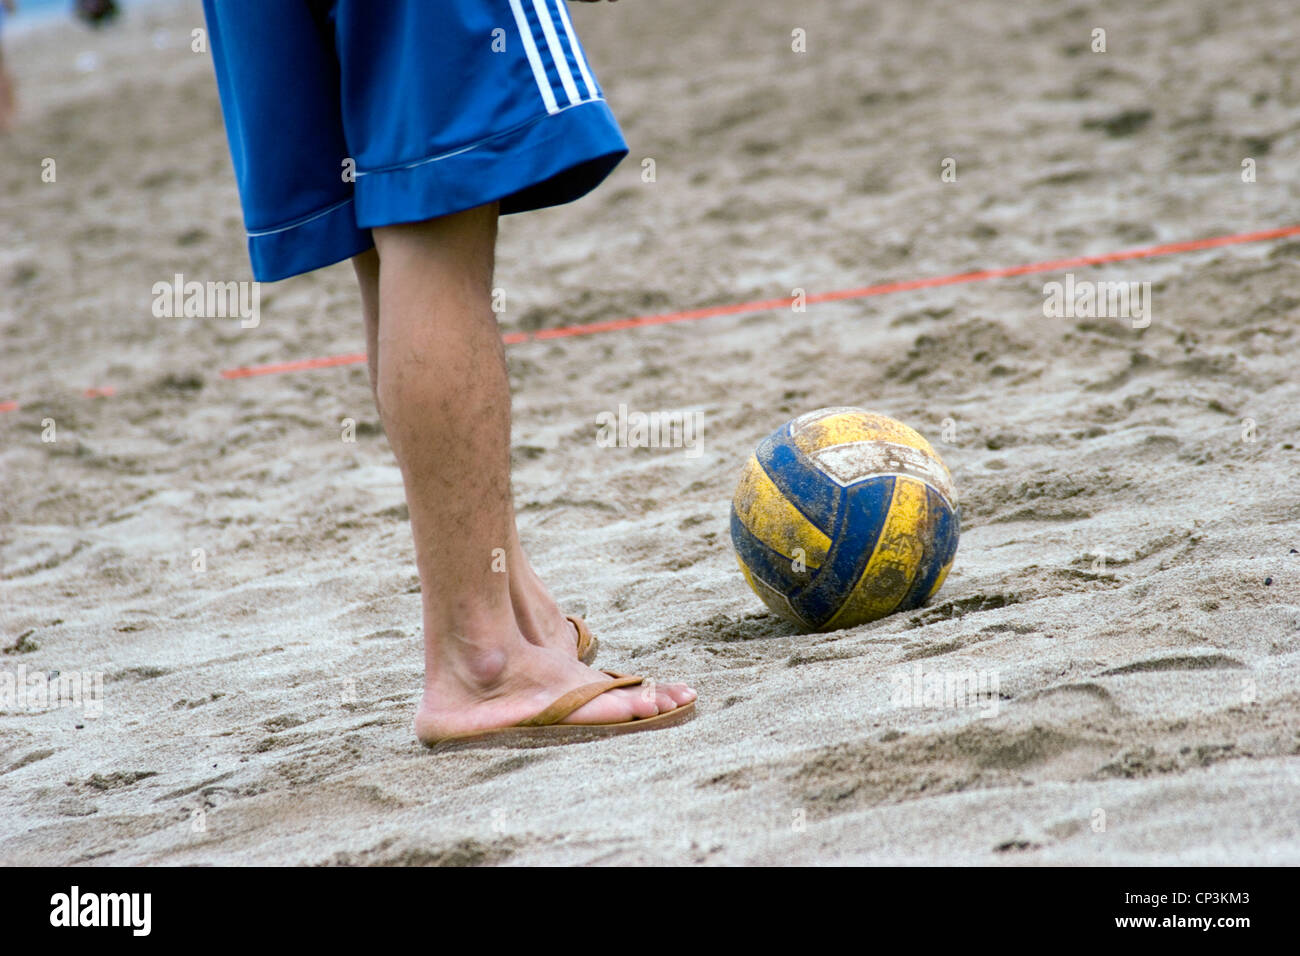 A teenage soccer player is wearing rubber sandals at a match on the sandy shore of the Mekong River in Vientiane, Laos. Stock Photo